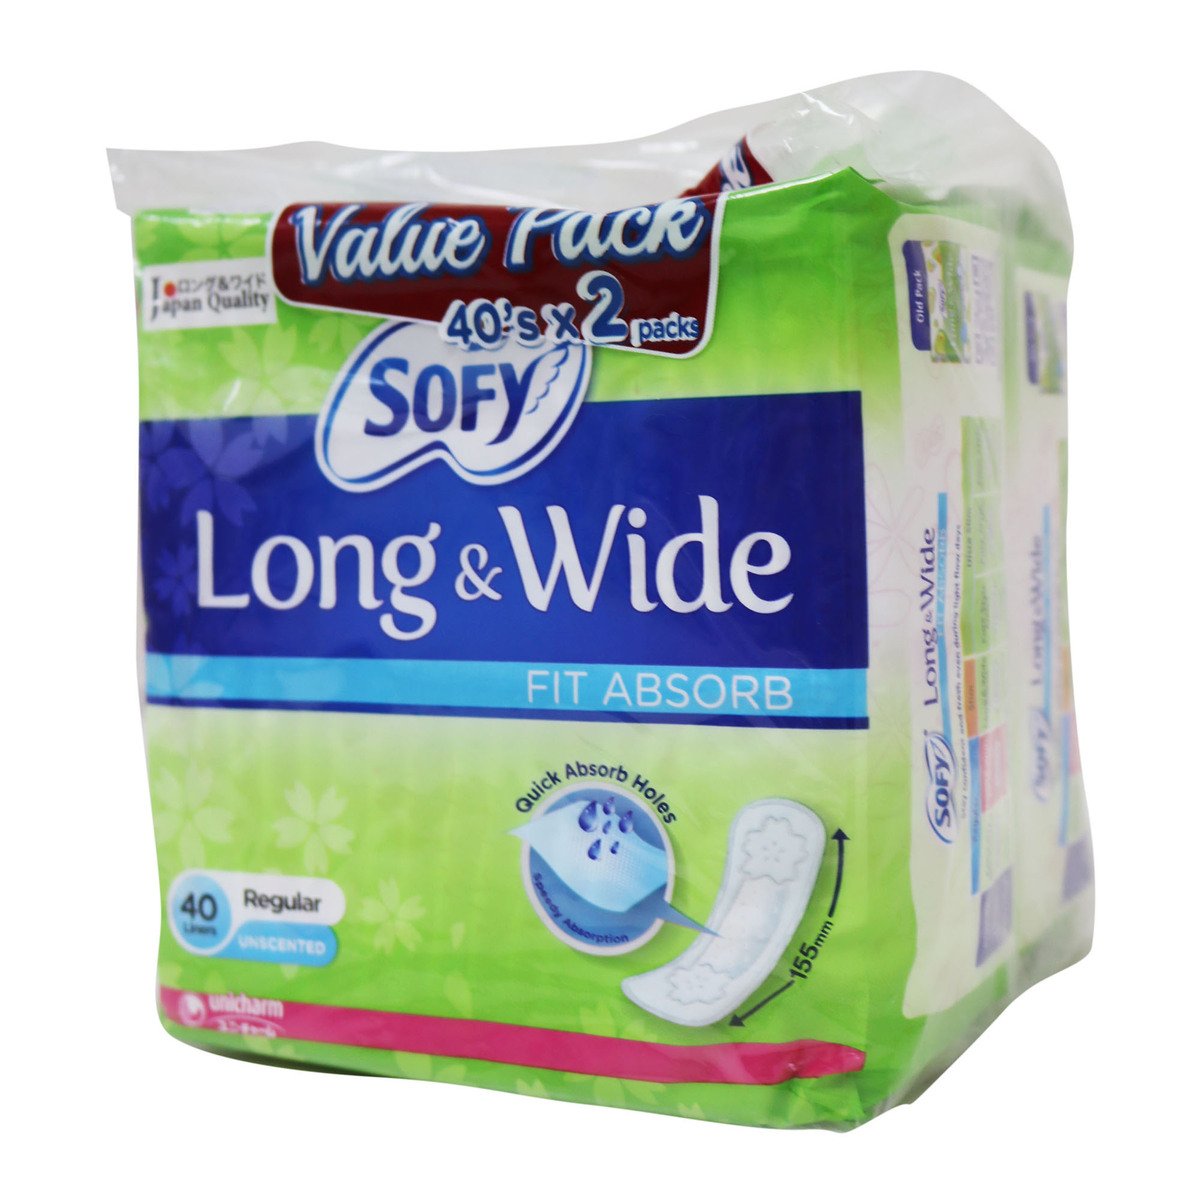 Sofy Panty Liner Long & Wide Fit Absorb (US) 40 Counts Twin Pack